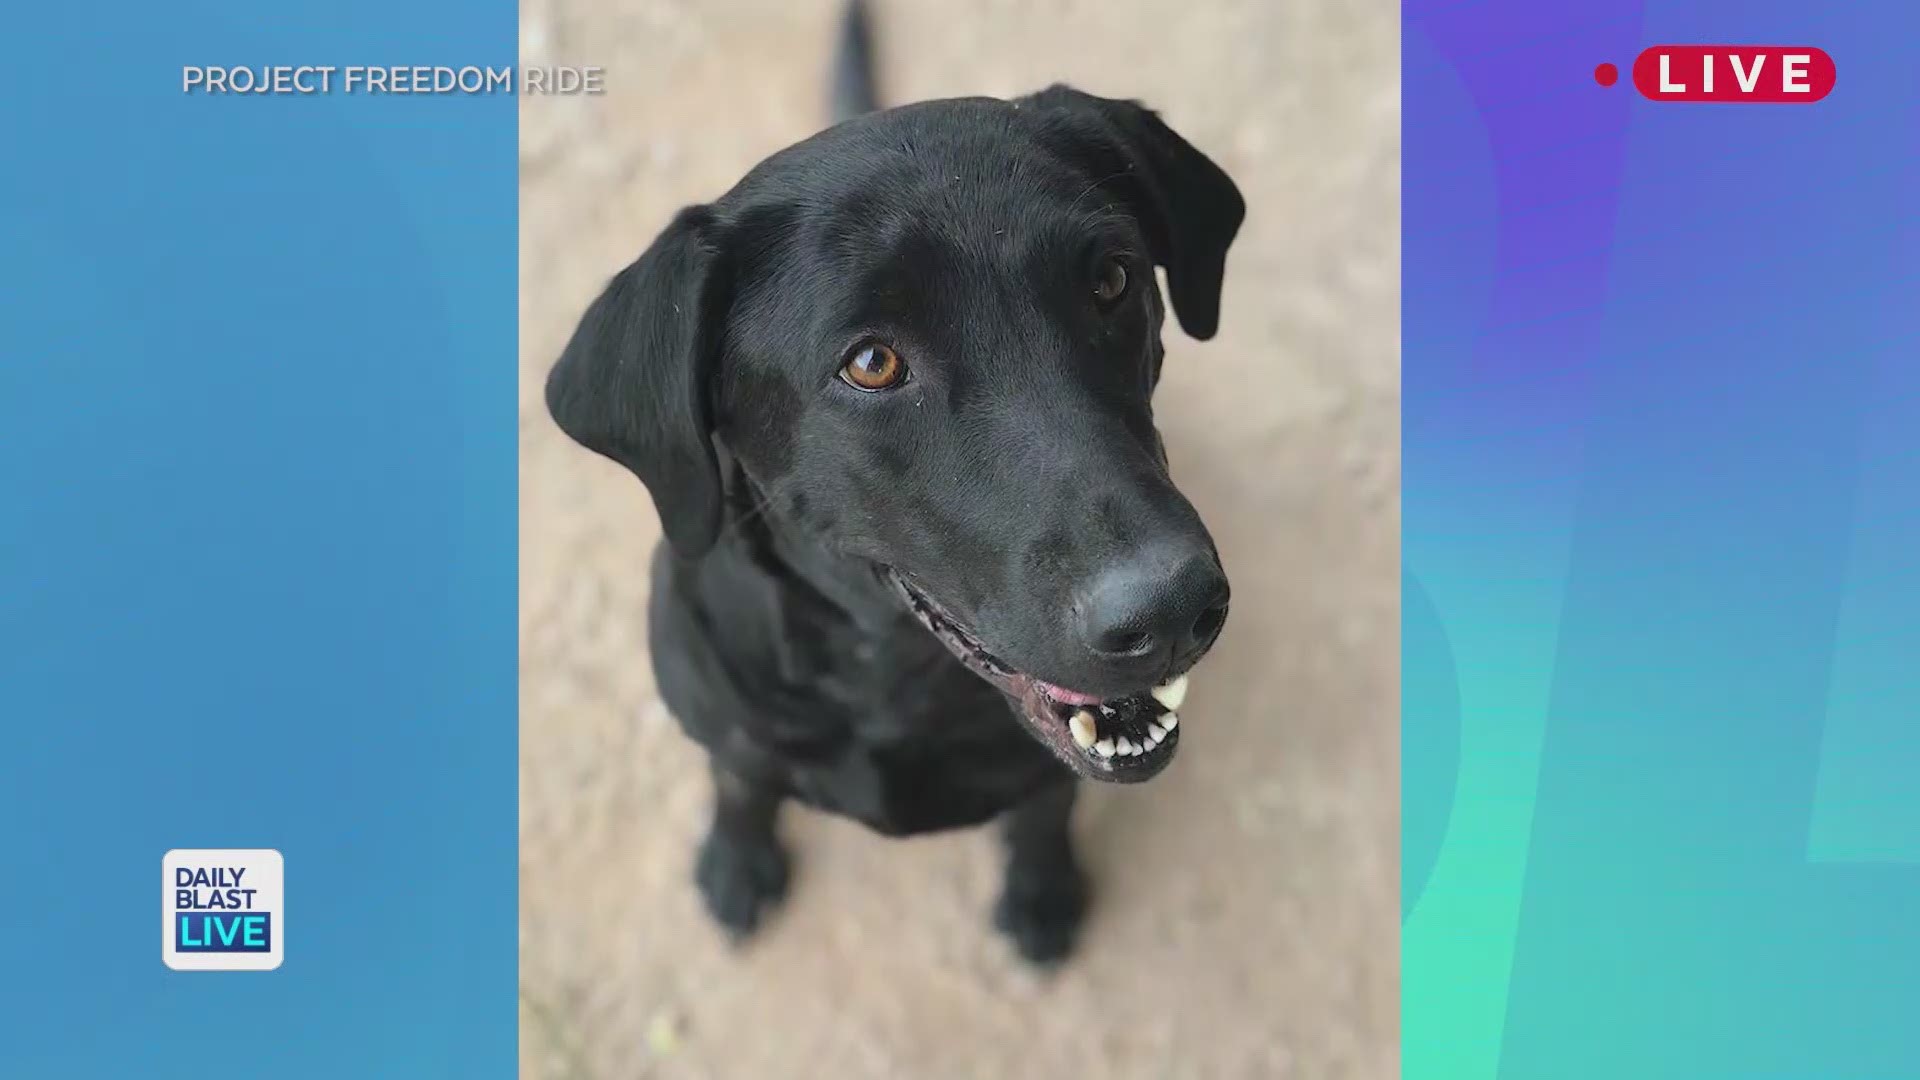 6-year-old Roman is on a mission to find homes for each and every rescue dog. This week, Roman is trying to find a forever family for Jett and Fischer, two 3-month-old lab mixes needing a new home. Daily Blast LIVE checked-in with our favorite puppy pitch